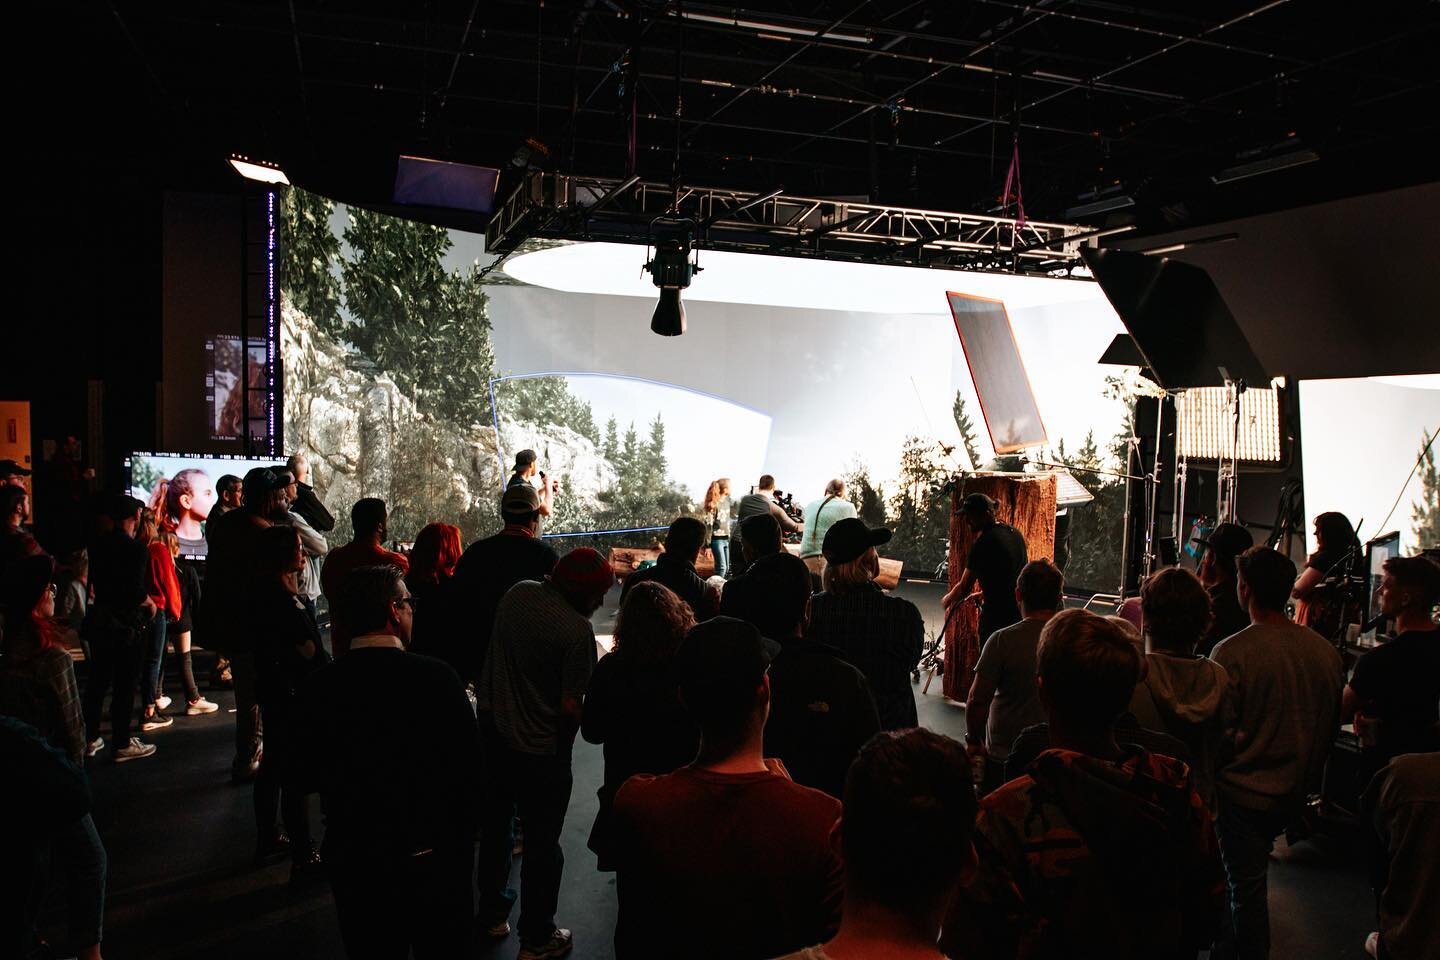 Grateful for a community that is as excited about this tech as we are! Thank you to all who were able to come out and see the wall up close. DM us with any questions and keep your eye out for the next community event! #virtualproduction
.
.
.
#unreal